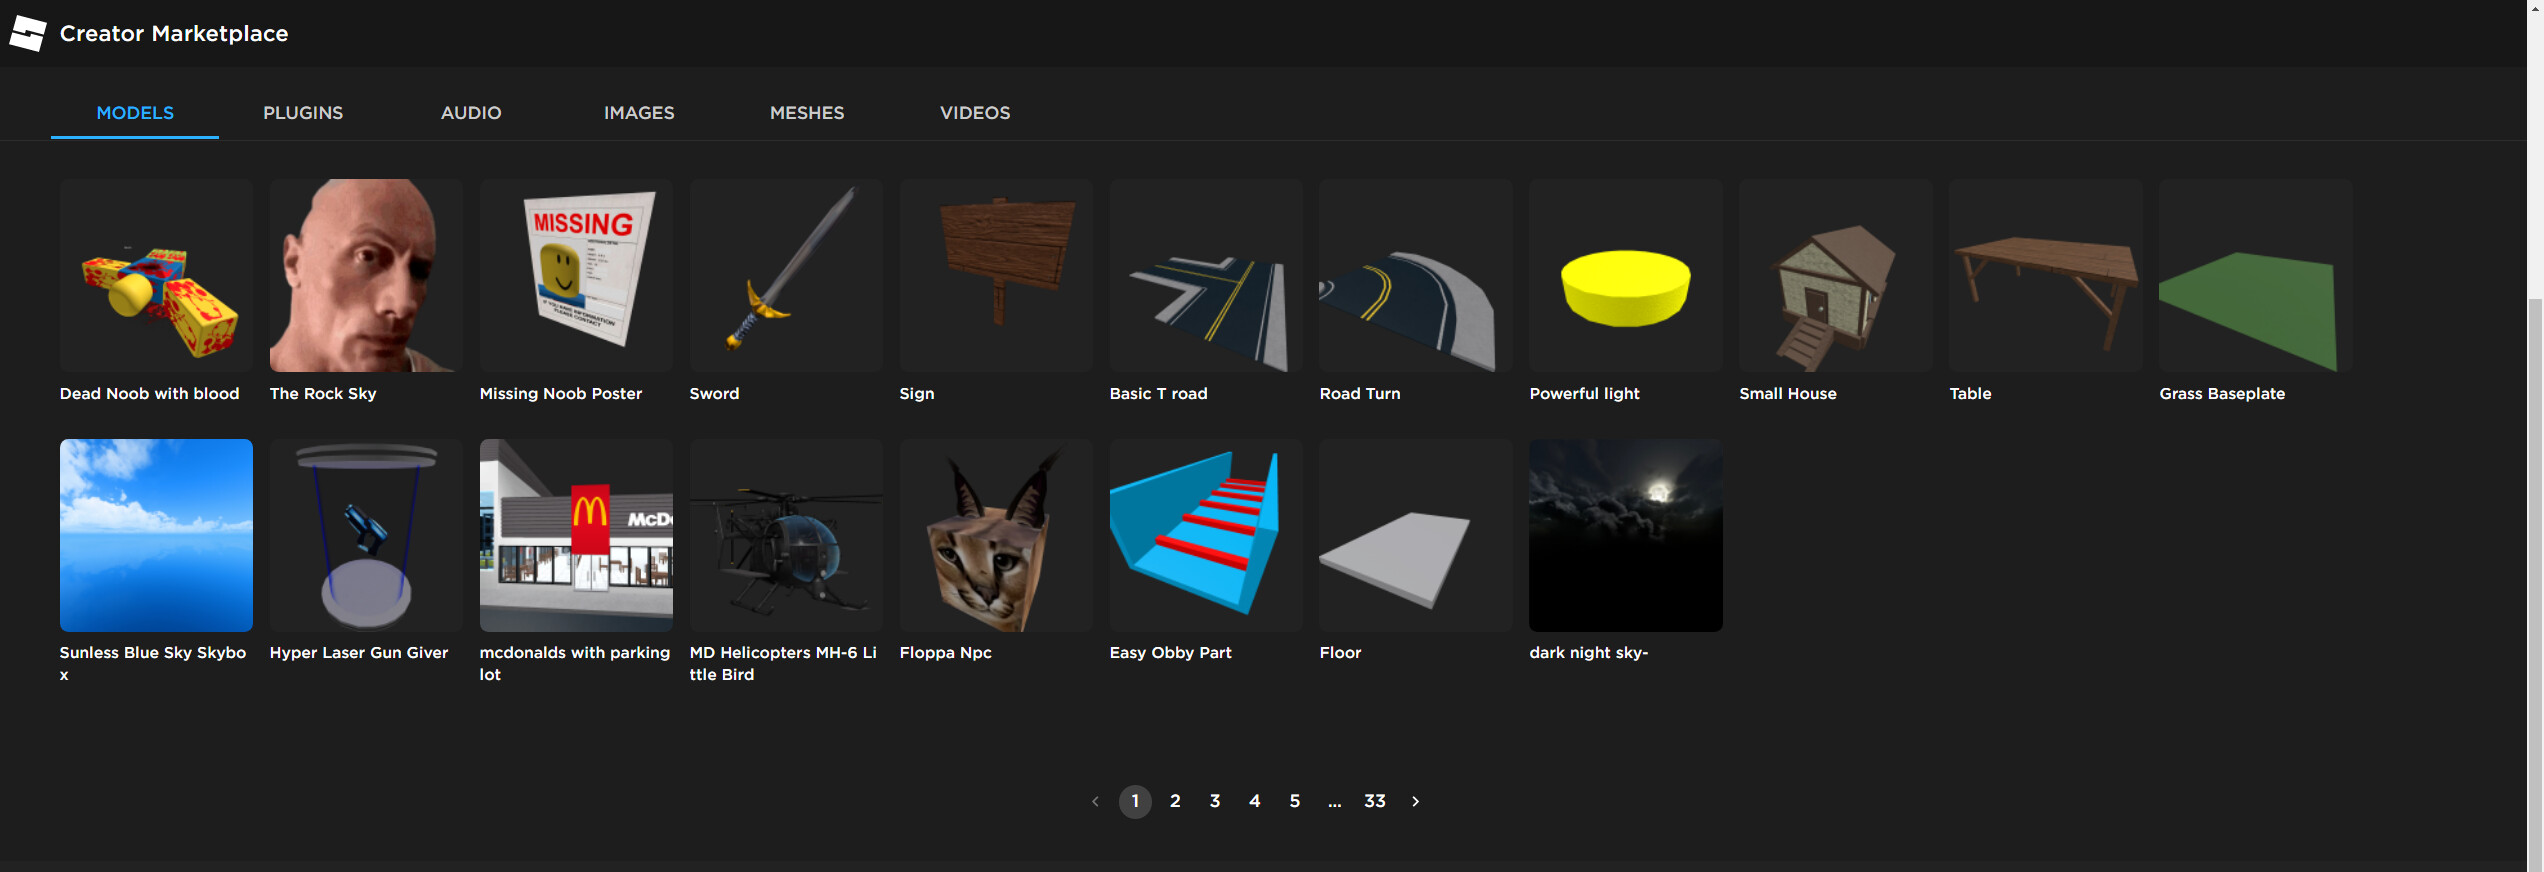 The Creator Marketplace – Roblox Support